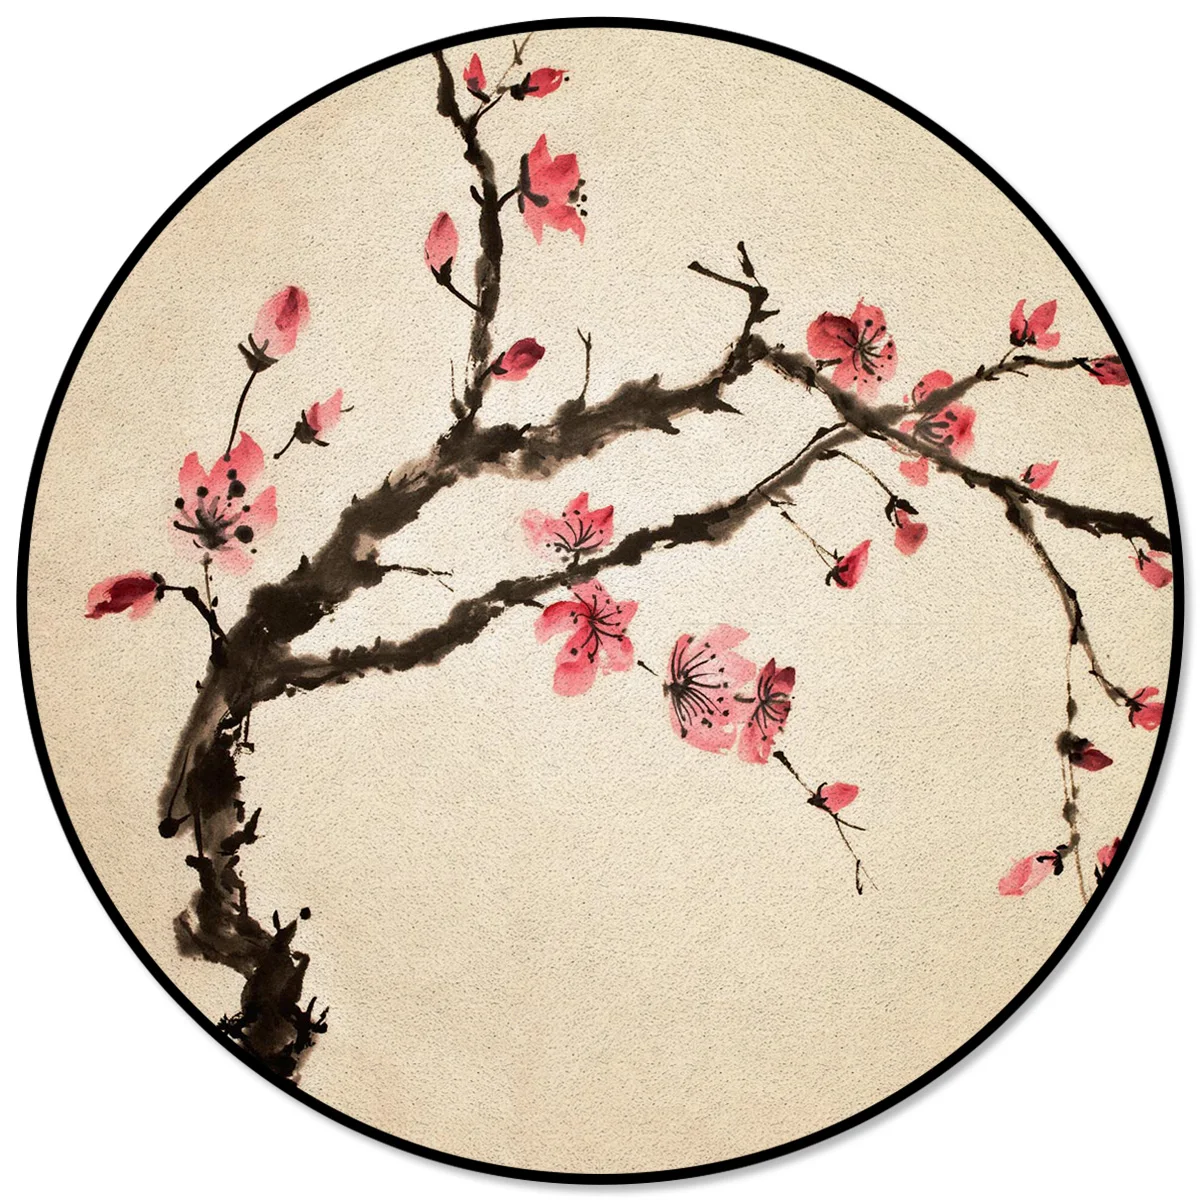 

Flower Plum Blossom Branch Bud Style Chinese Art Rugs And Carpets For Home Living Room Round Rug For Children Rooms Non-slip